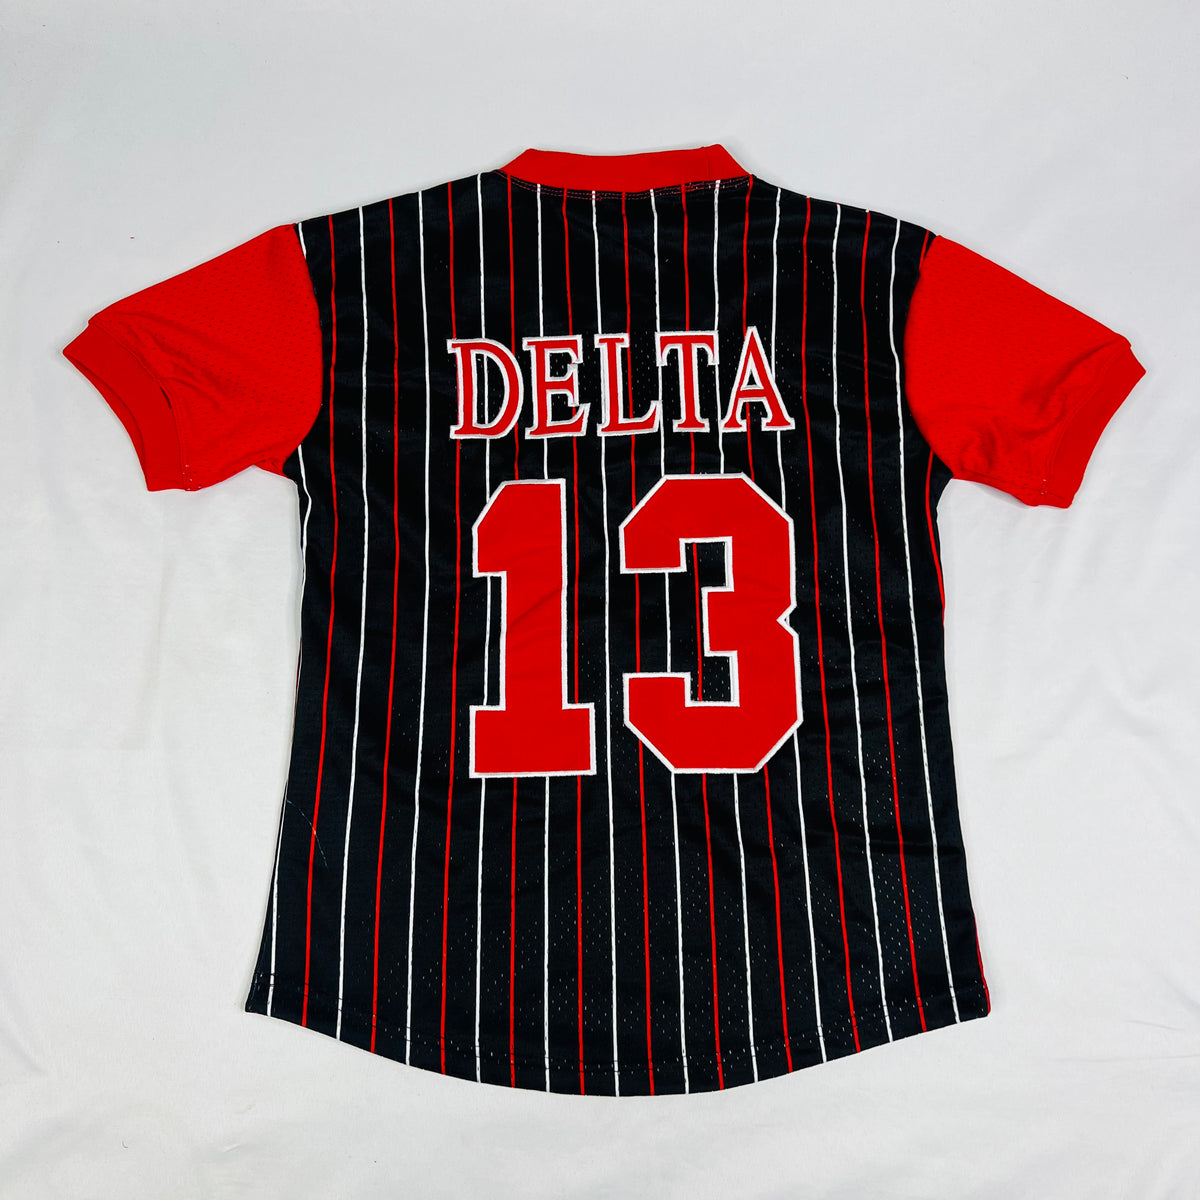 Delta Black Striped Baseball Jersey – The King McNeal Collection